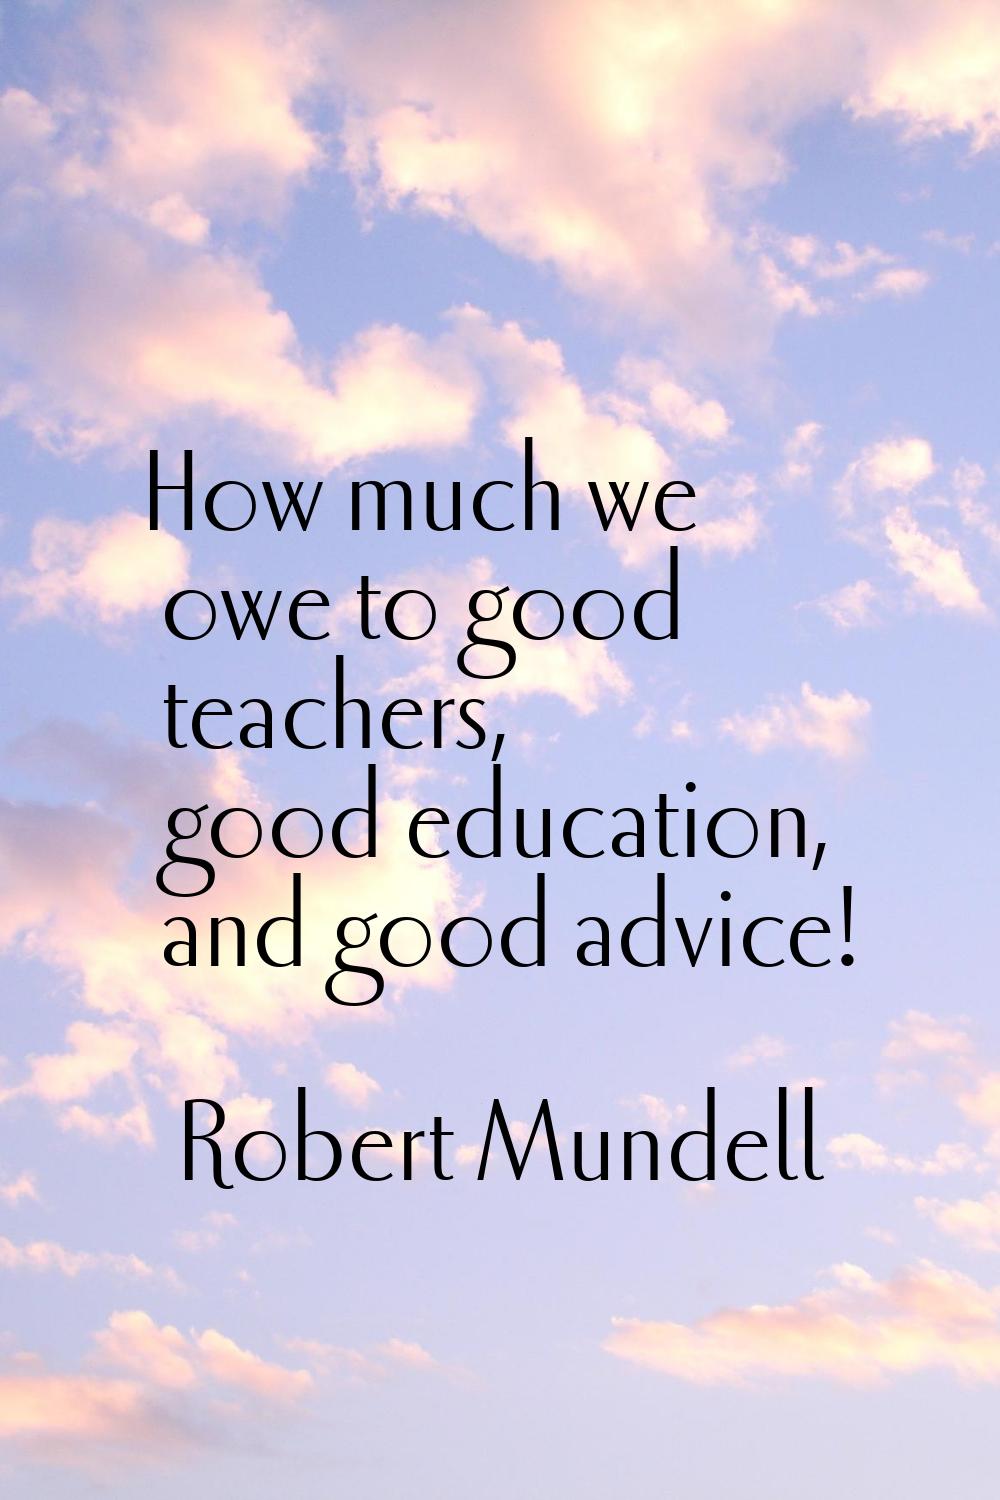 How much we owe to good teachers, good education, and good advice!